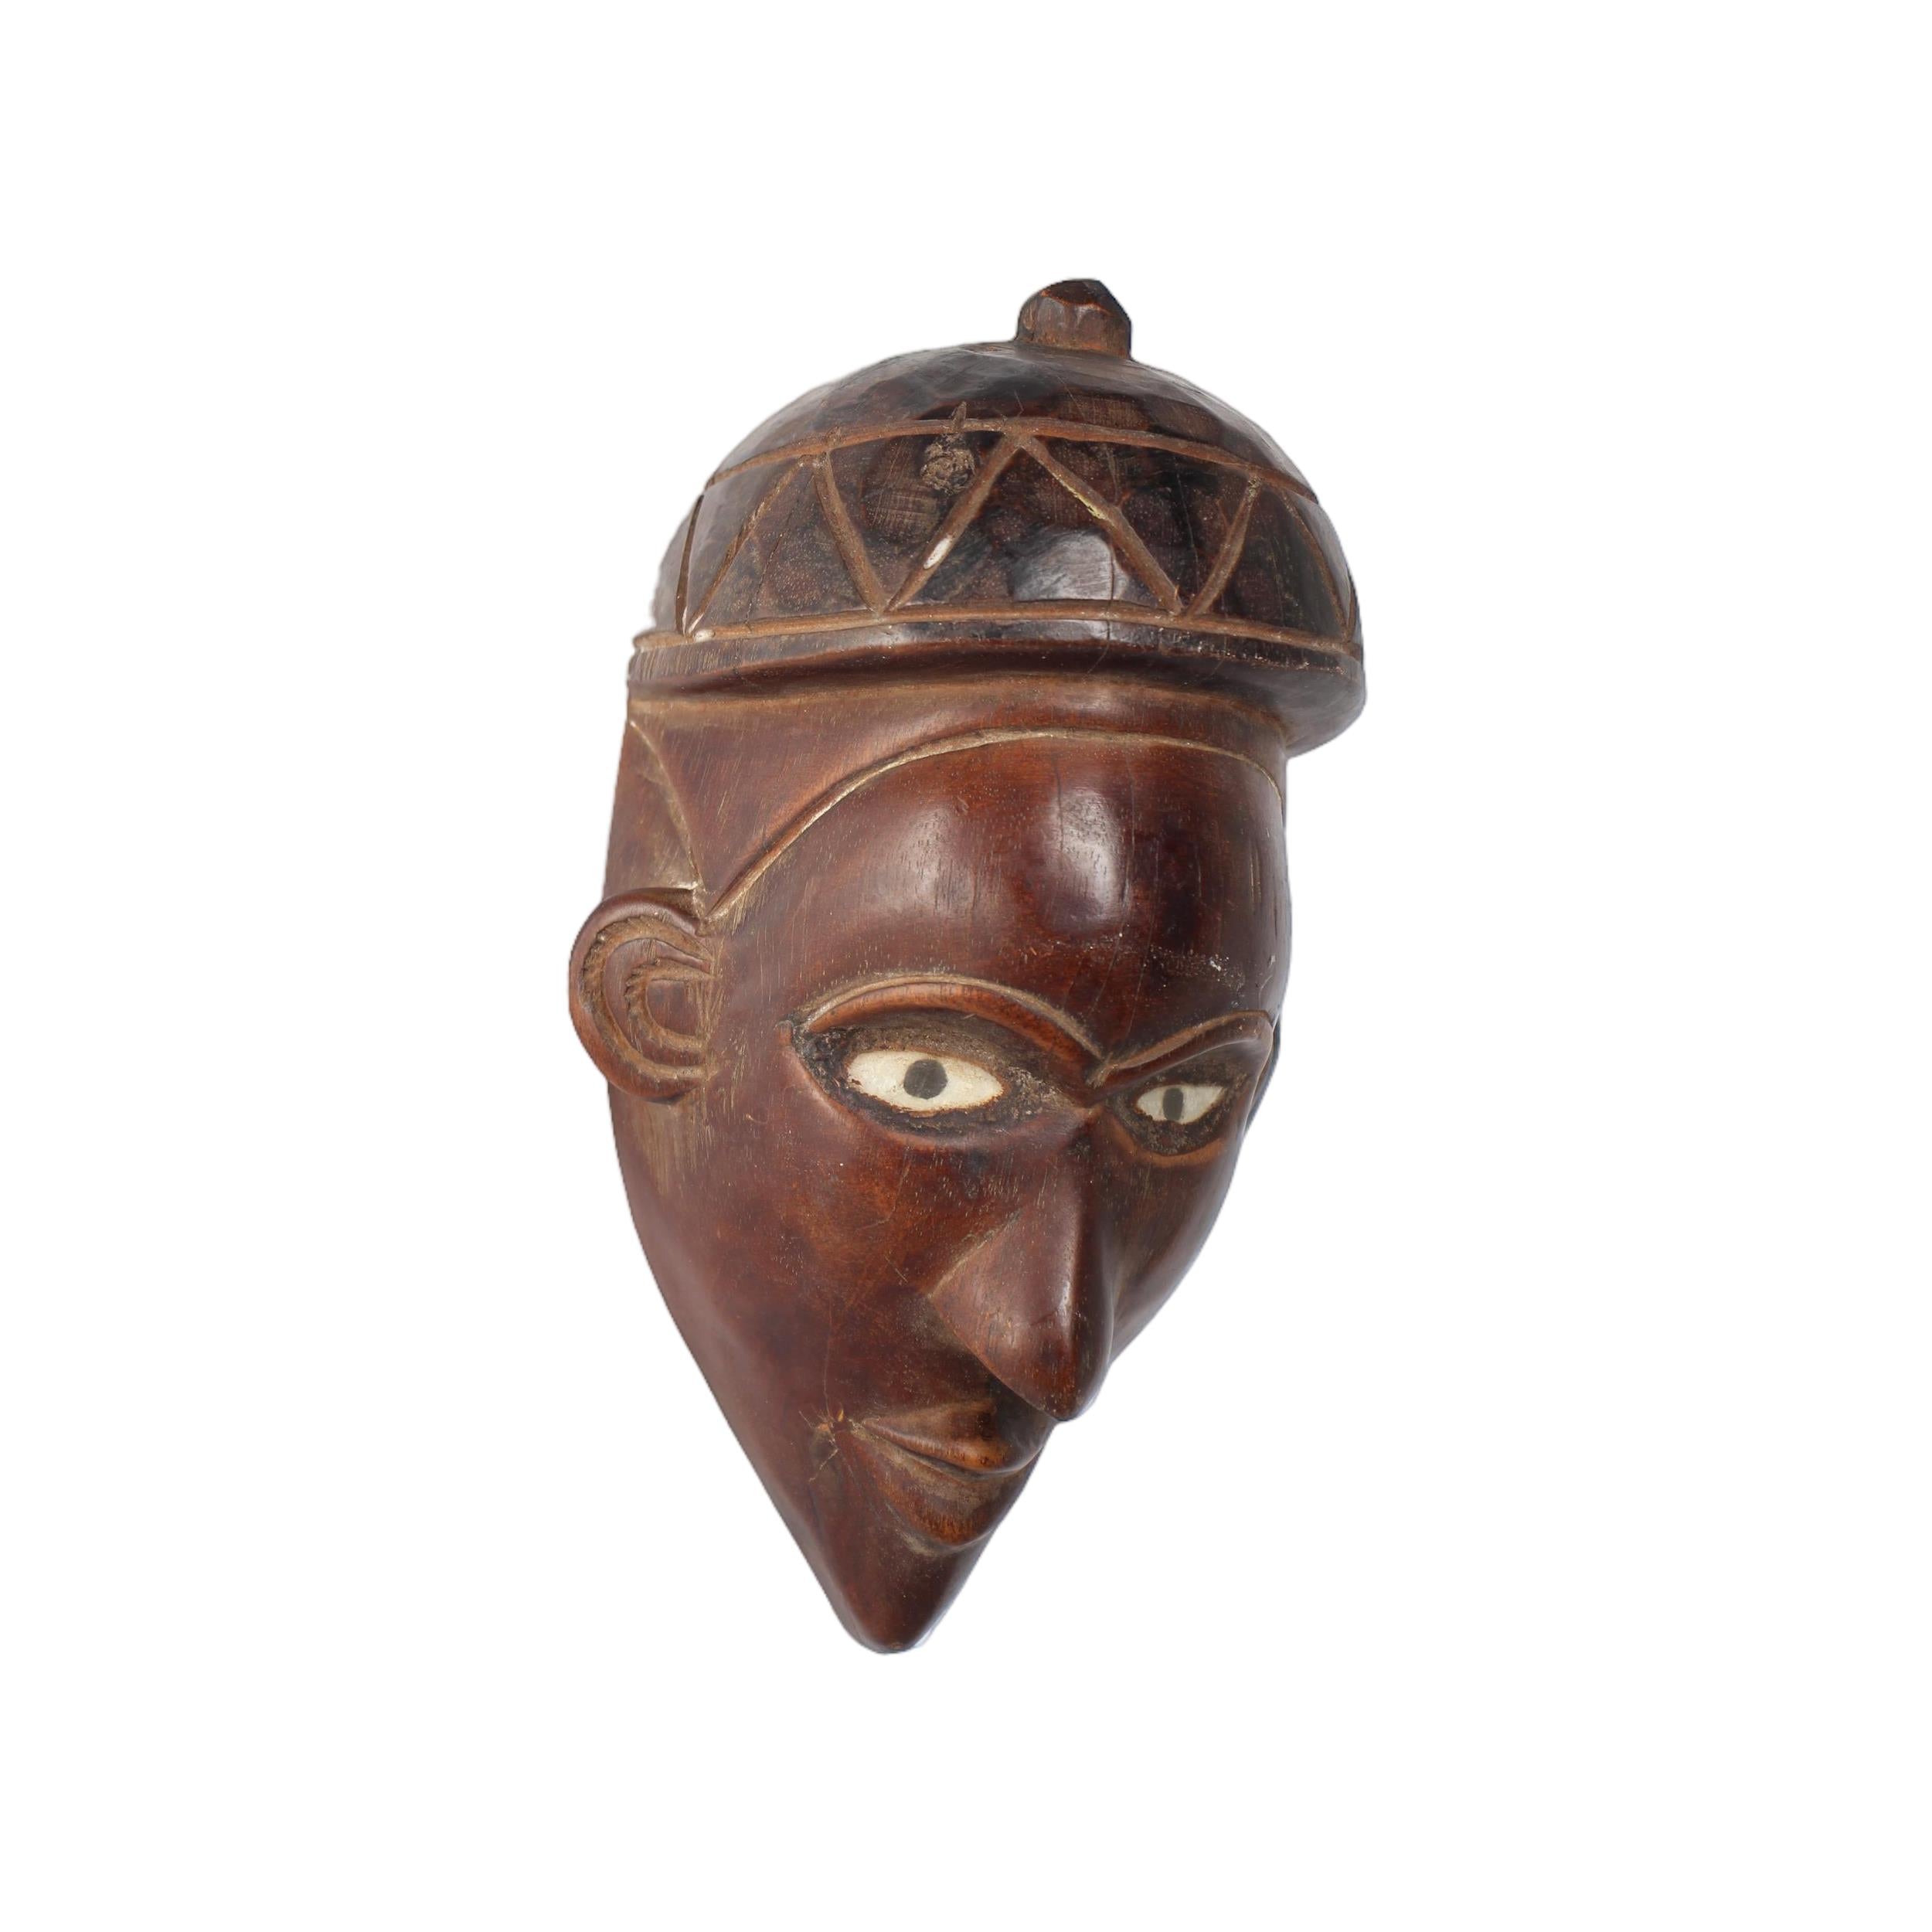 Pende Tribe Mask ~8.7" Tall